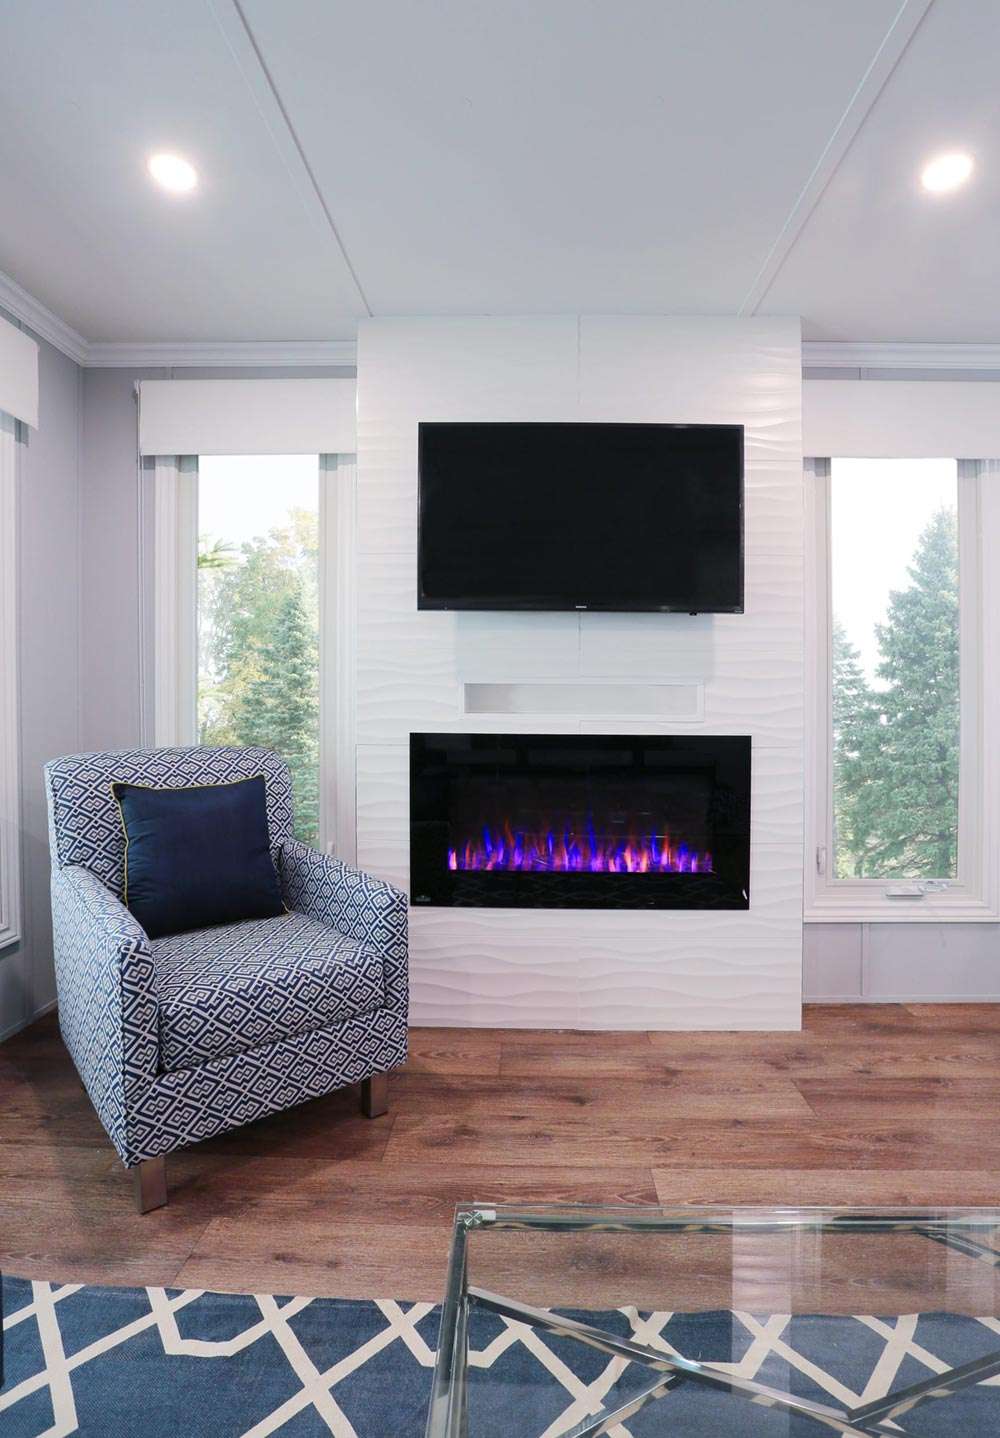 Fireplace wit a TV above and white-blue armchair on the left